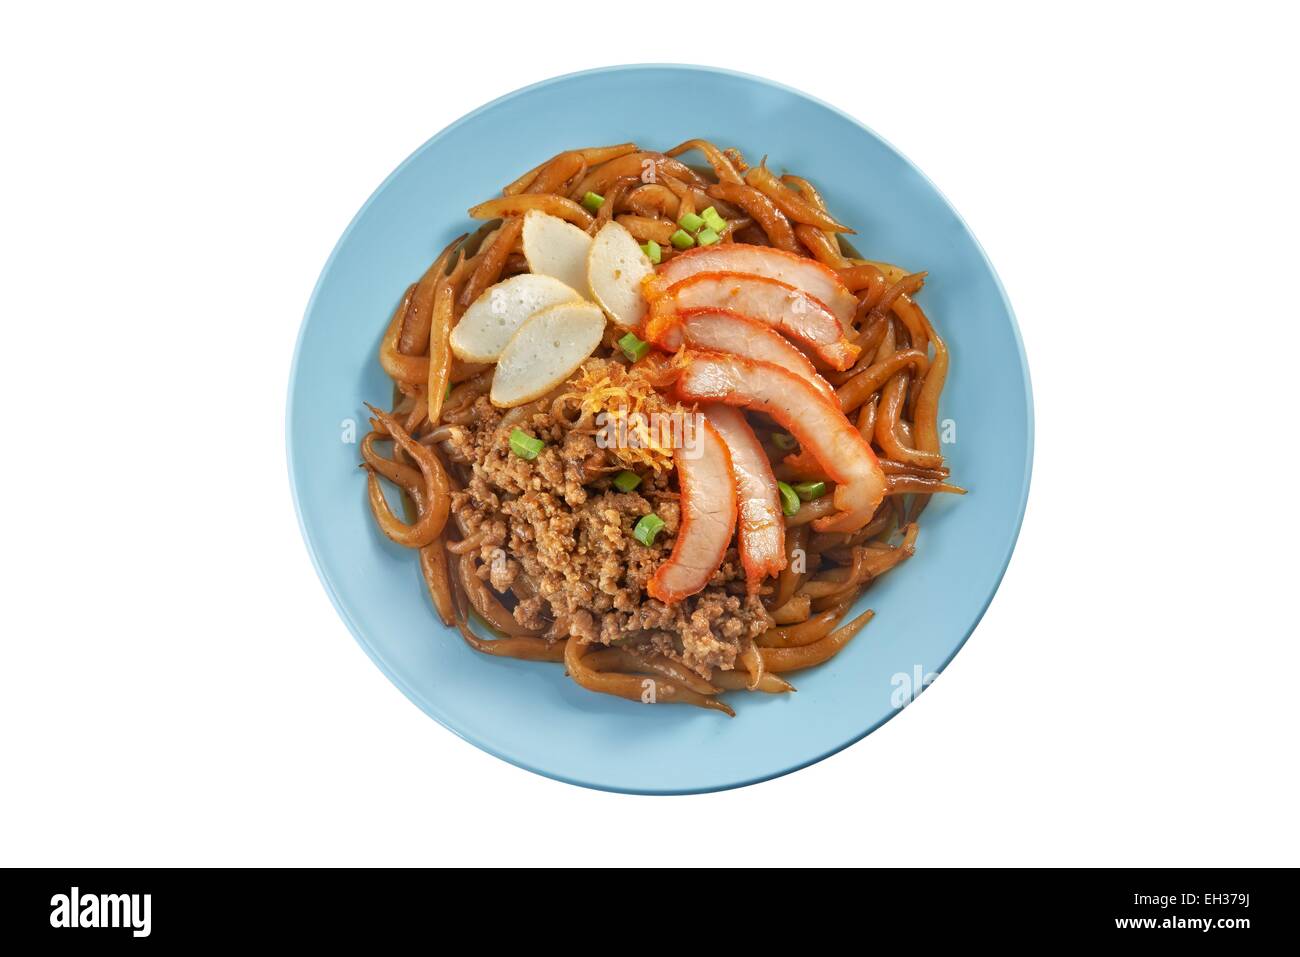 Fried noodle with pork sliced, fish cake and minced pork Stock Photo